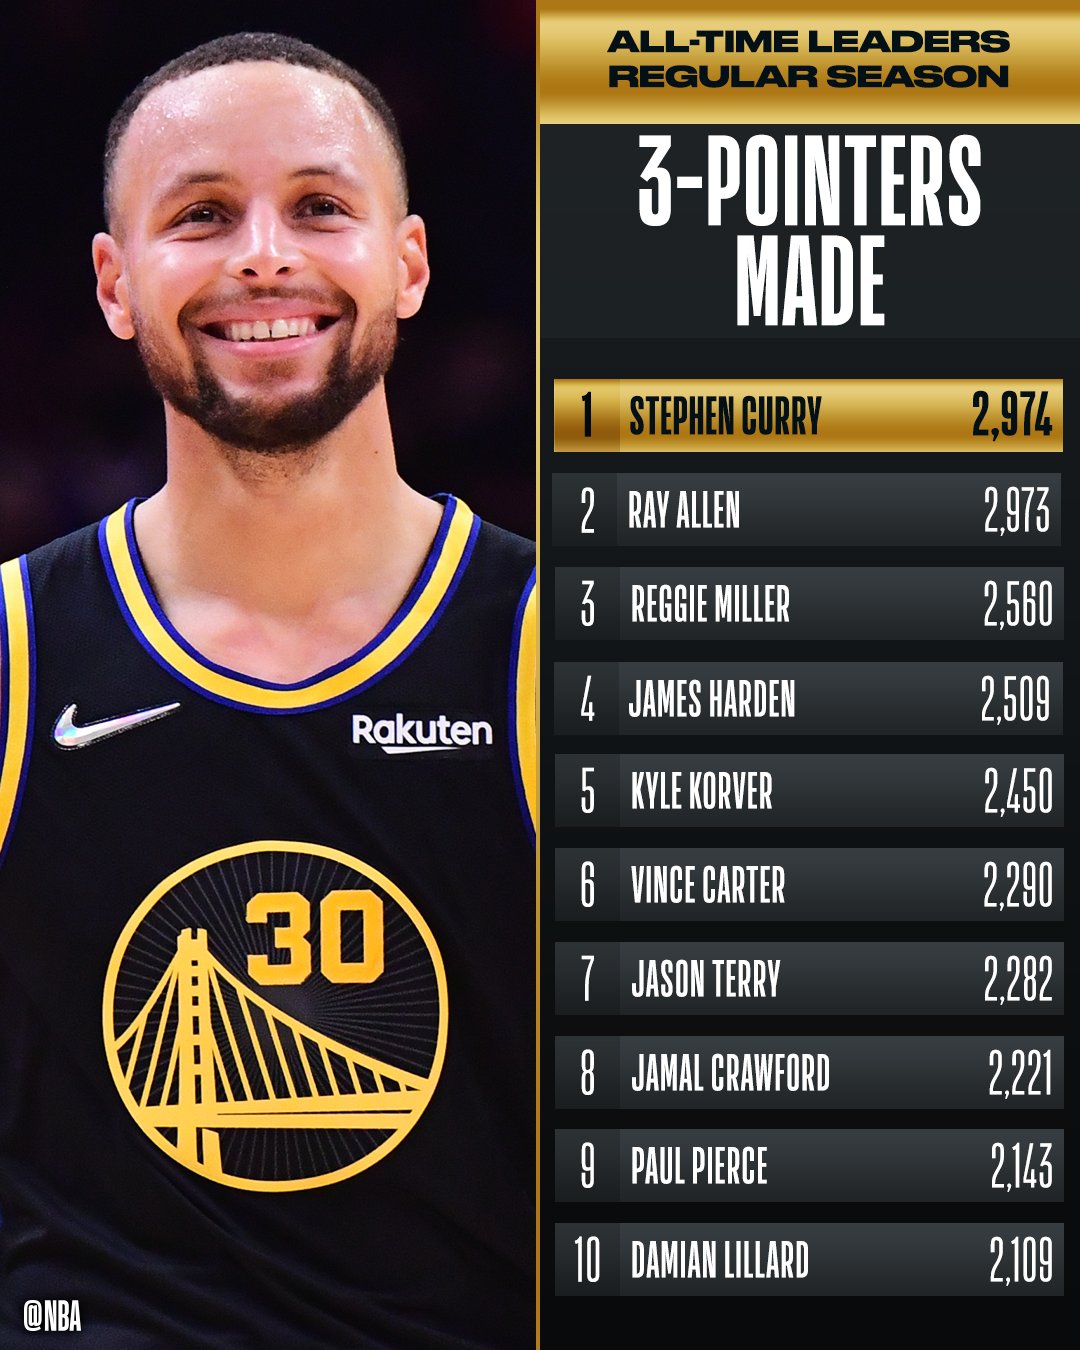 NBA on Twitter: "Congrats to @StephenCurry30 of the @warriors for becoming the NBA's ALL-TIME LEADER in threes made! #NBA75 / Twitter